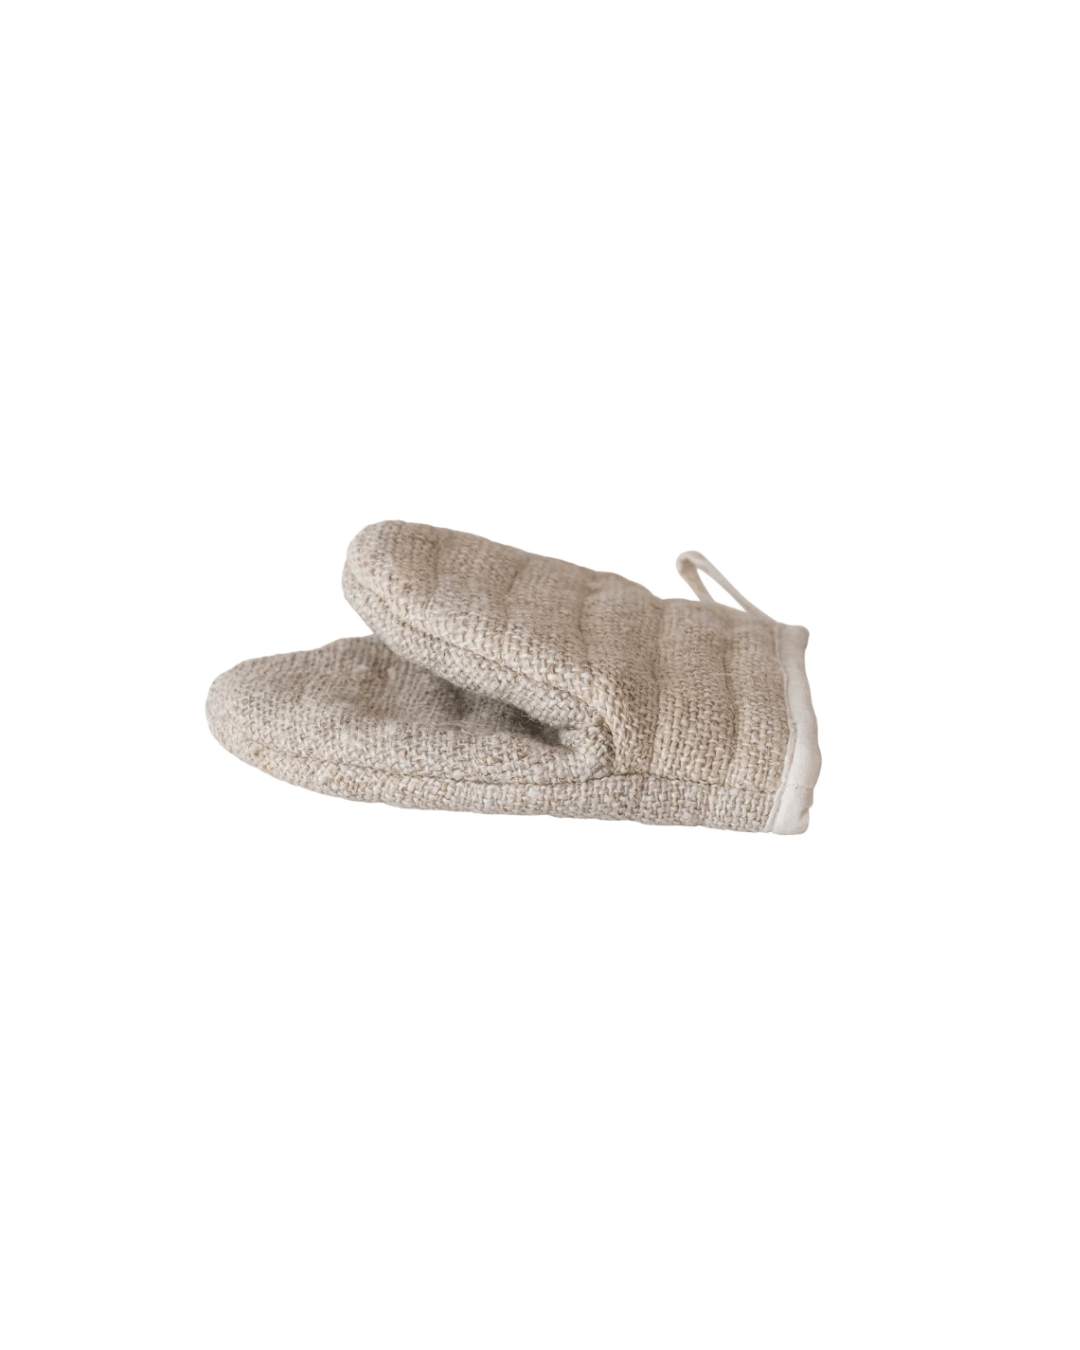 A Hemp Fiber & Cotton Canvas Oven Mitt by Creative Co-op isolated on a white background, reminiscent of Scottsdale Arizona's warm tones.